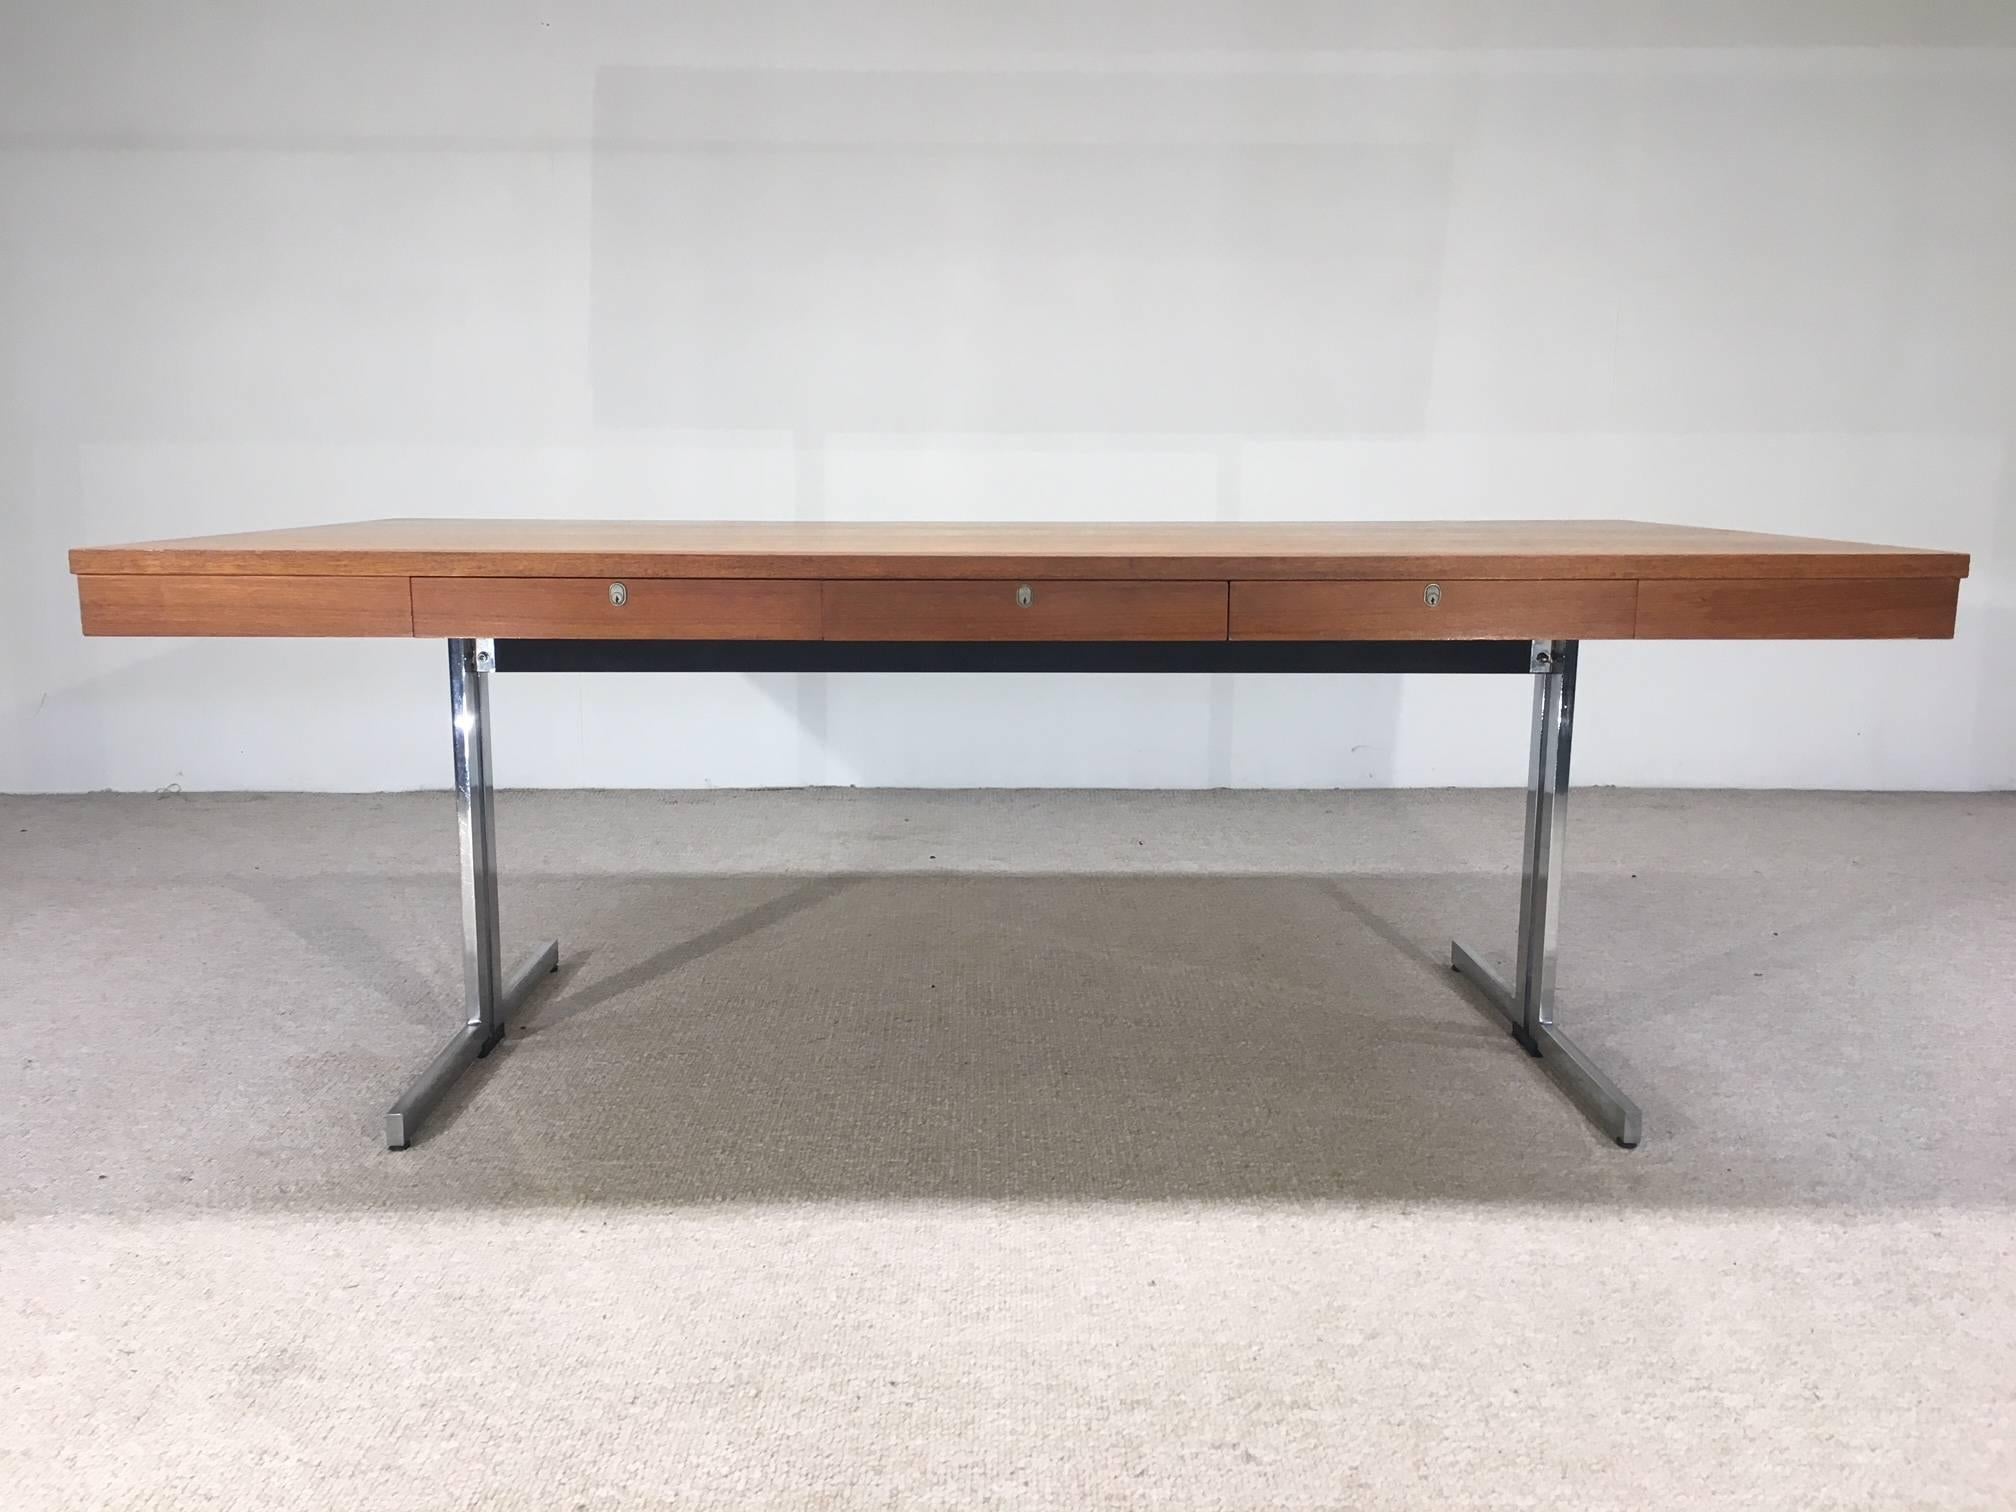 Teak executive desk having splayed chromed steel base attributed to Walter Knoll and produced by Pfandsiegel-Germany, circa 1960.
Keys not present. Wonderful, well maintained vintage condition.
Measures: H 30.75 in. x W 78.75 in. x D 39.5